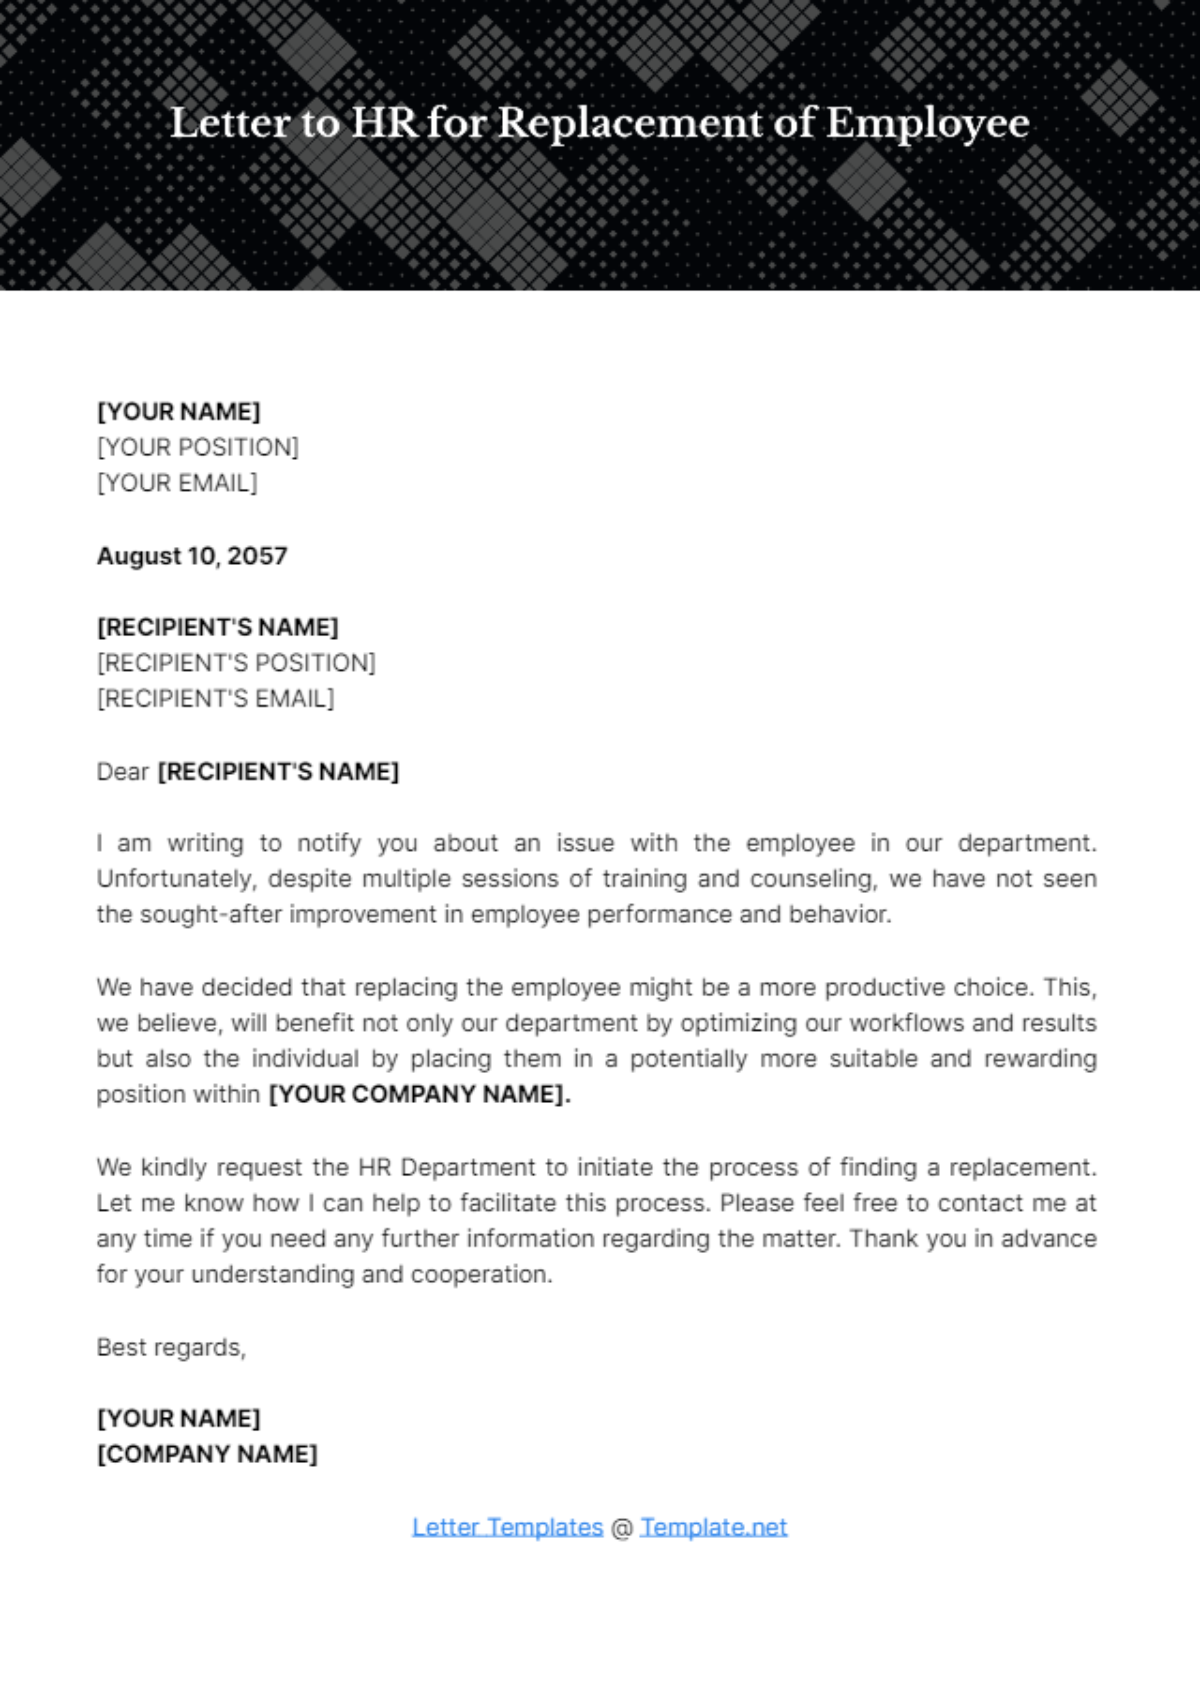 Letter to HR for Replacement of Employee Template